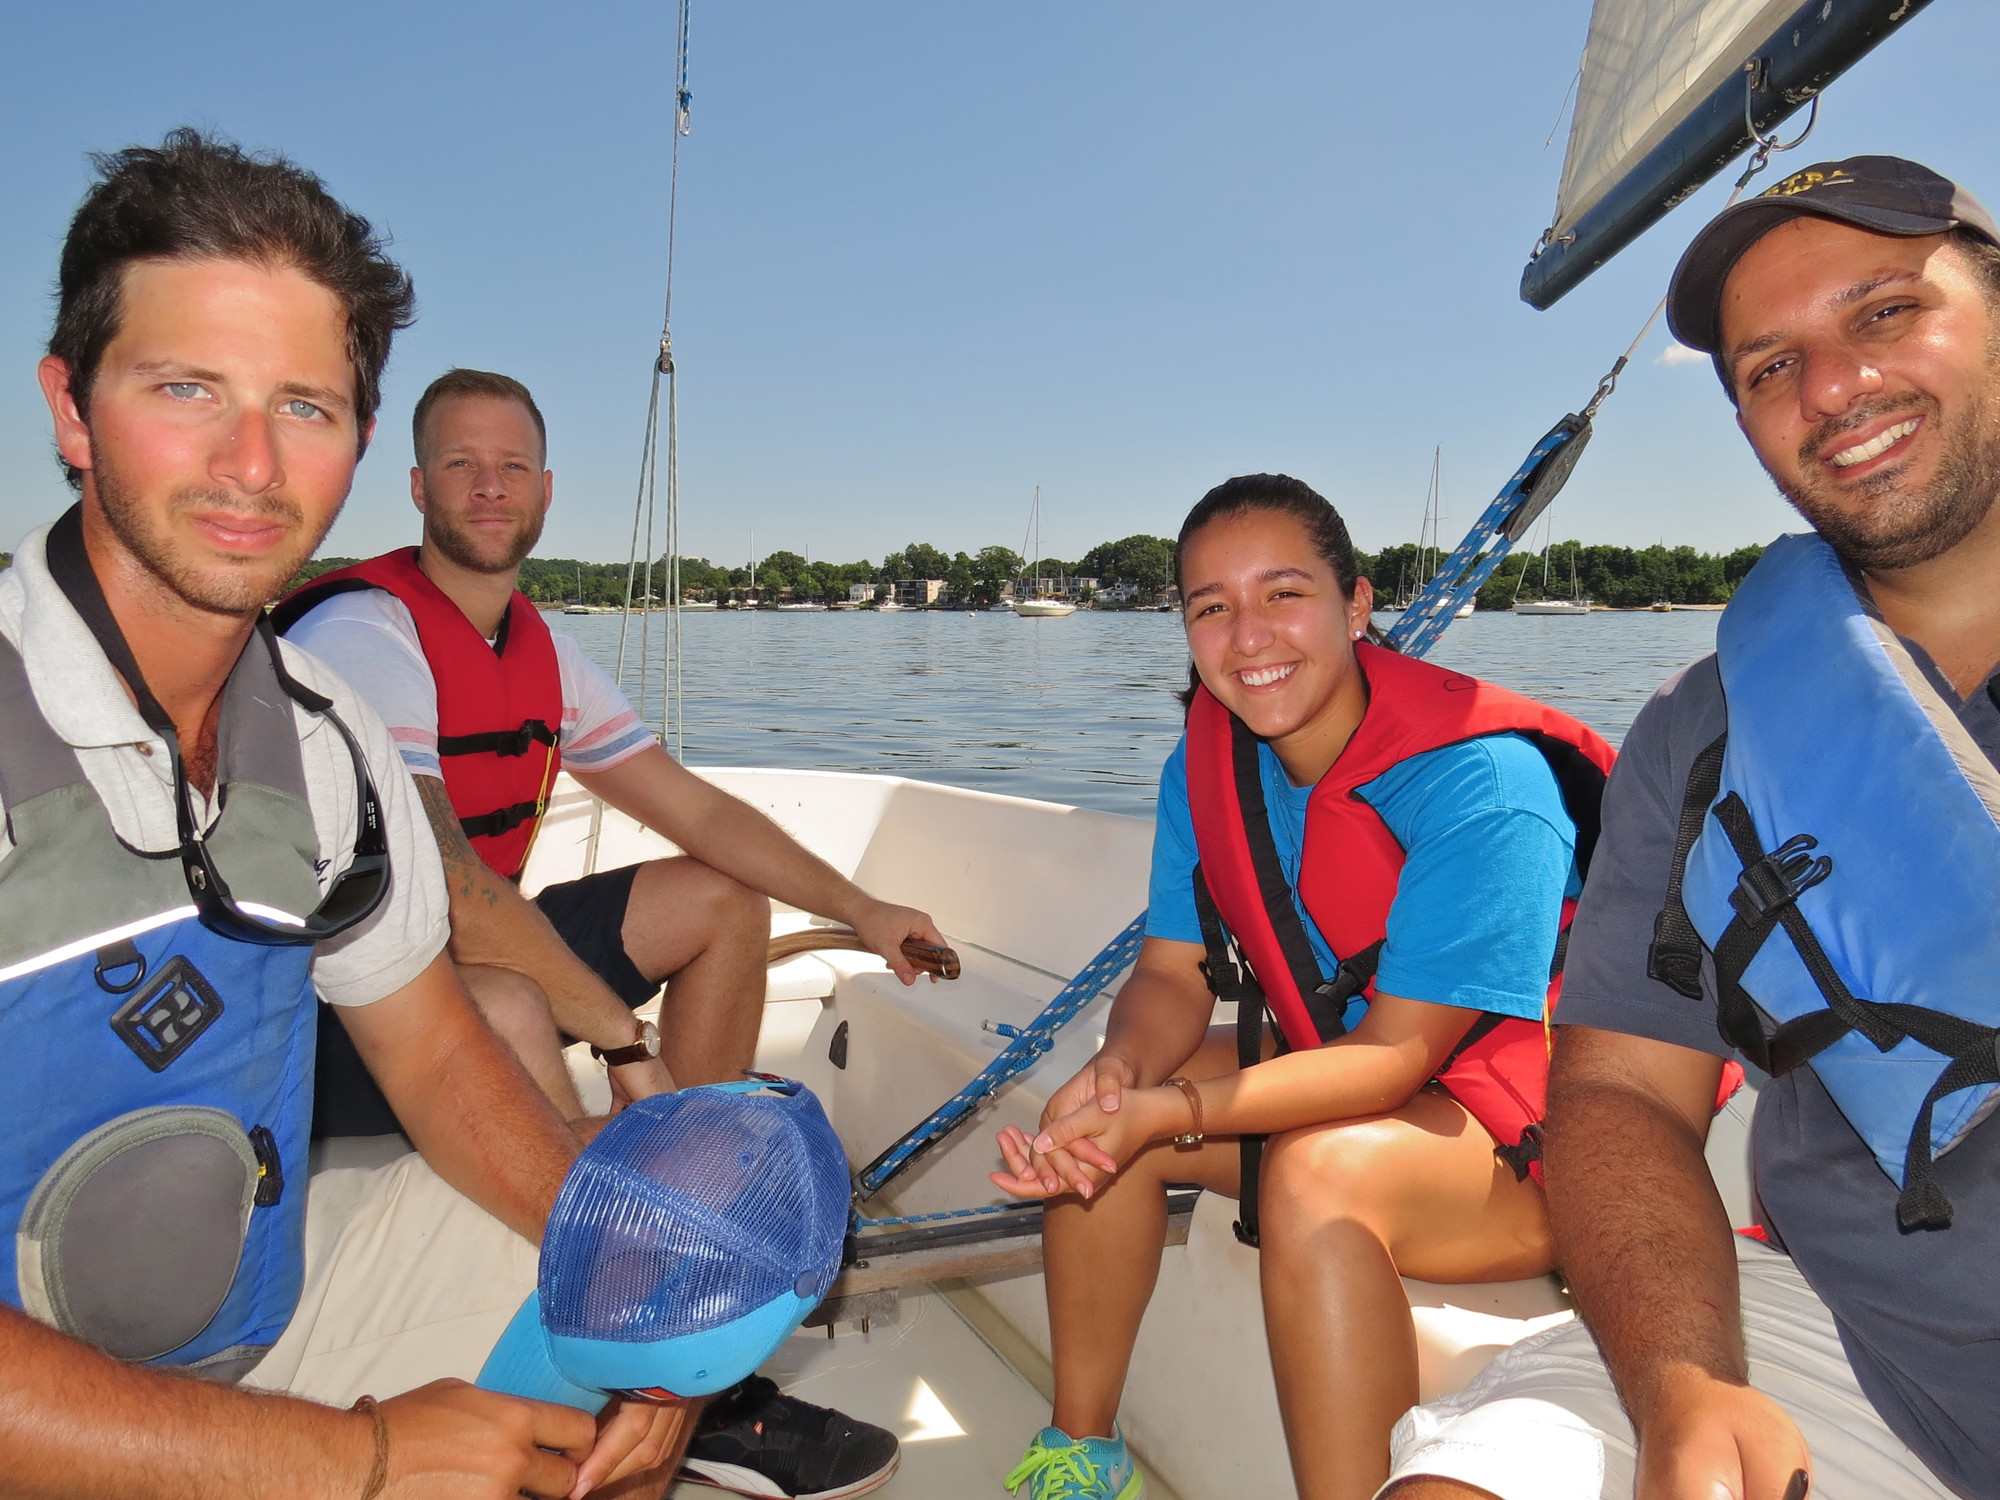 Herald intern Taylor Zambrano with her instructor Eric Wolf, far left, and fellow students Anthony DiMatteo and Jason Thomas, learned the intricacies of sailing in Port Washington.